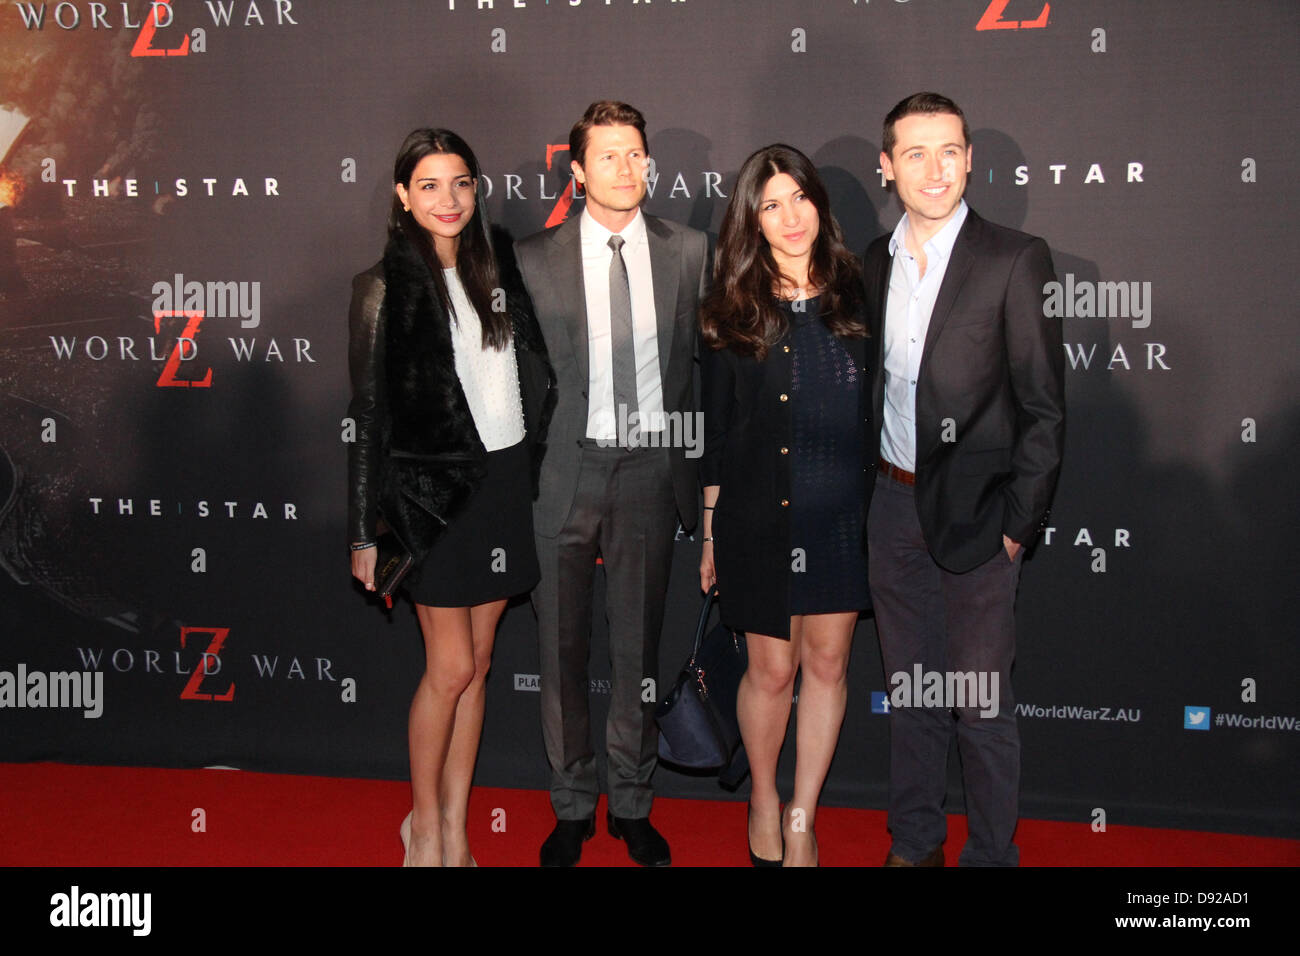 The Star Event Centre, Pirrama Road, Pyrmont, Sydney, NSW, Australia. 9 June 2013. Stars walked the red carpet at Star Casino in Sydney for the Australian Premiere of World War Z. Picture L-R: Rey Vakili, Jason Dundas, Hoda Waterhouse and Tom Waterhouse. Credit: Credit:  Richard Milnes / Alamy Live News. Stock Photo